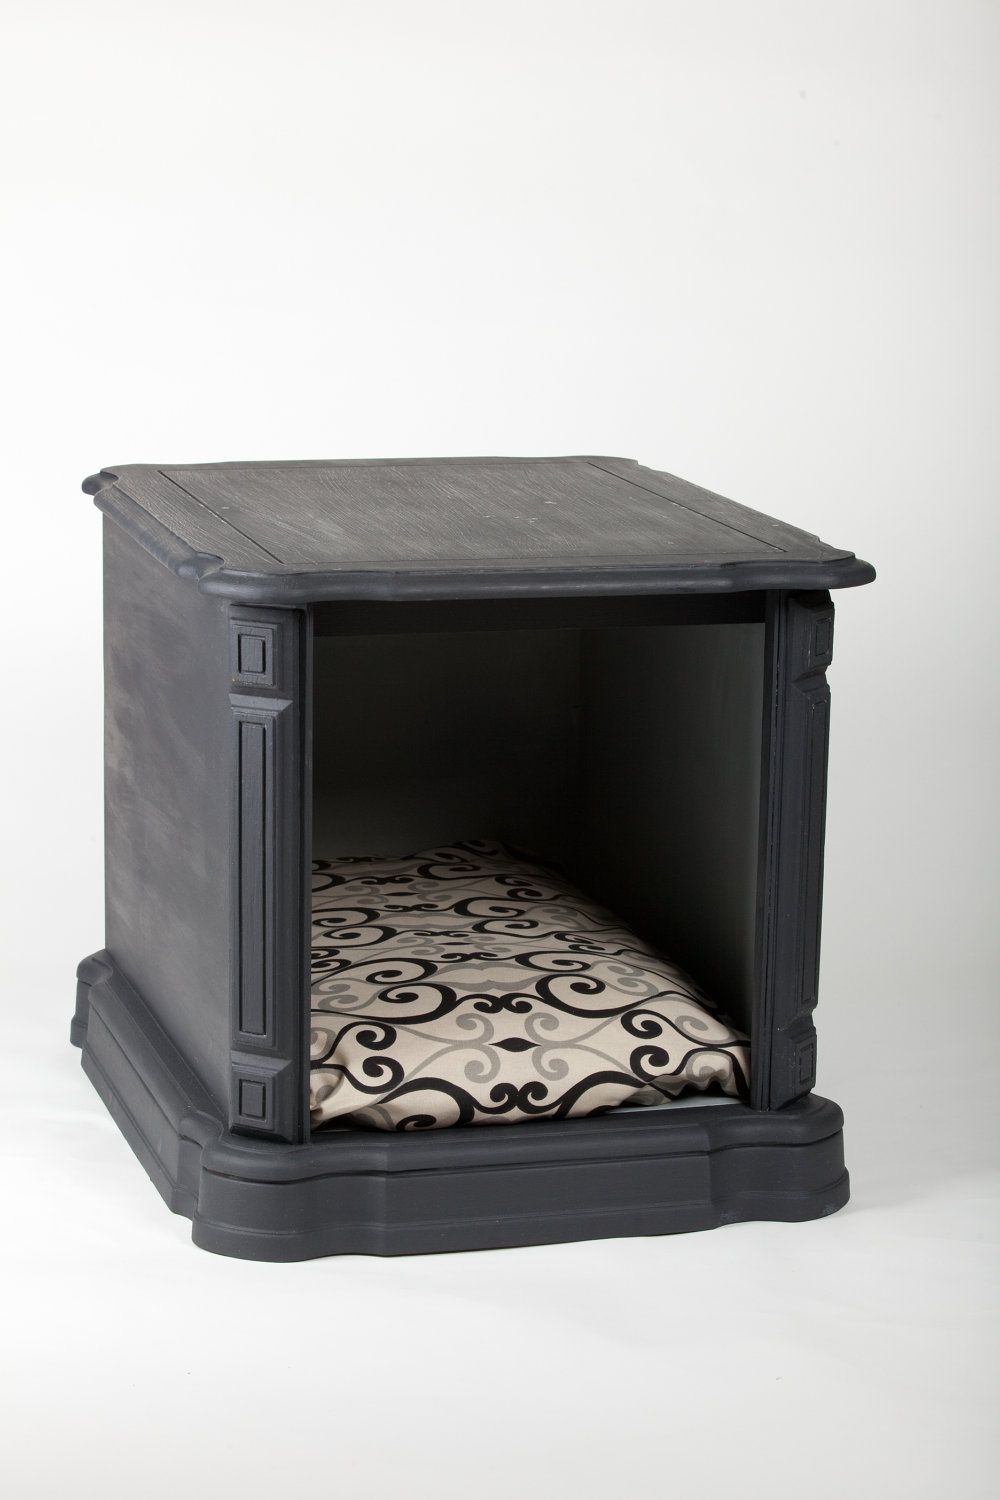 Free shipping cozy pet bed end table nightstand by lauratown1